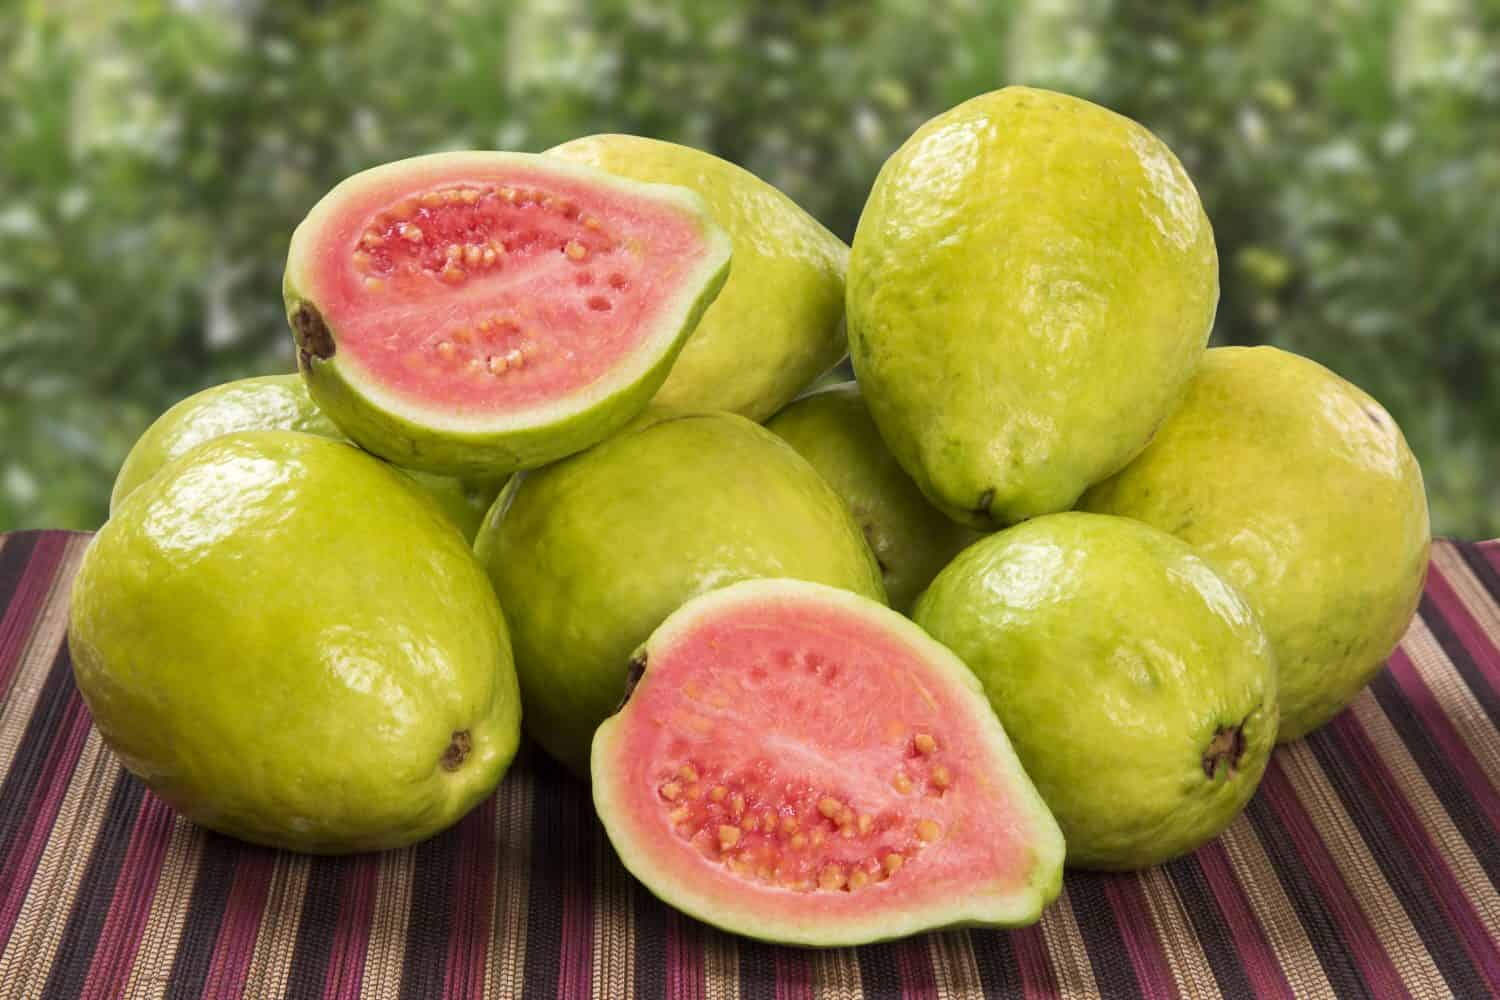 Some brazilian guavas over a striped surface.